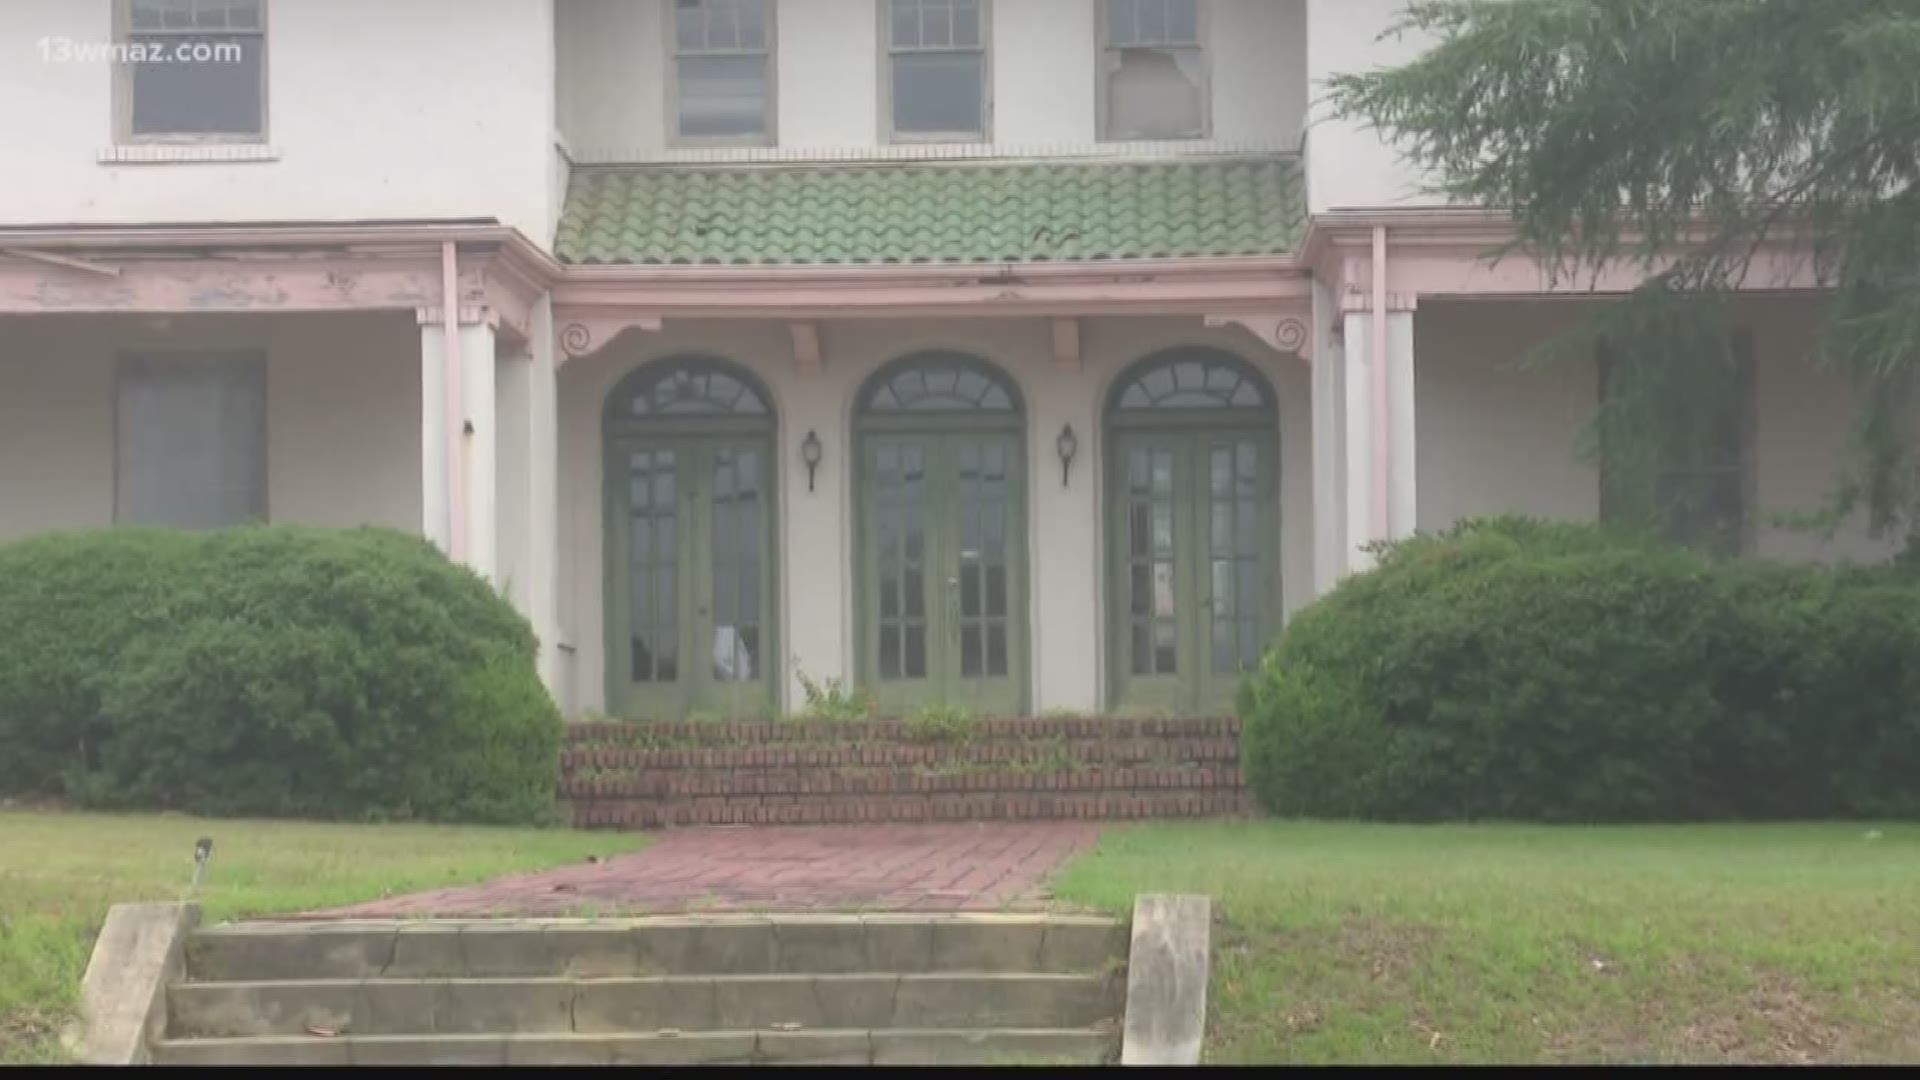 The historic Chivers Home in Dublin isn't in good condition, and a family with ties to the home is fighting to restore it. Back in 2017 the Georgia Trust for Historic Preservation put the house on a list of places in peril across the state.